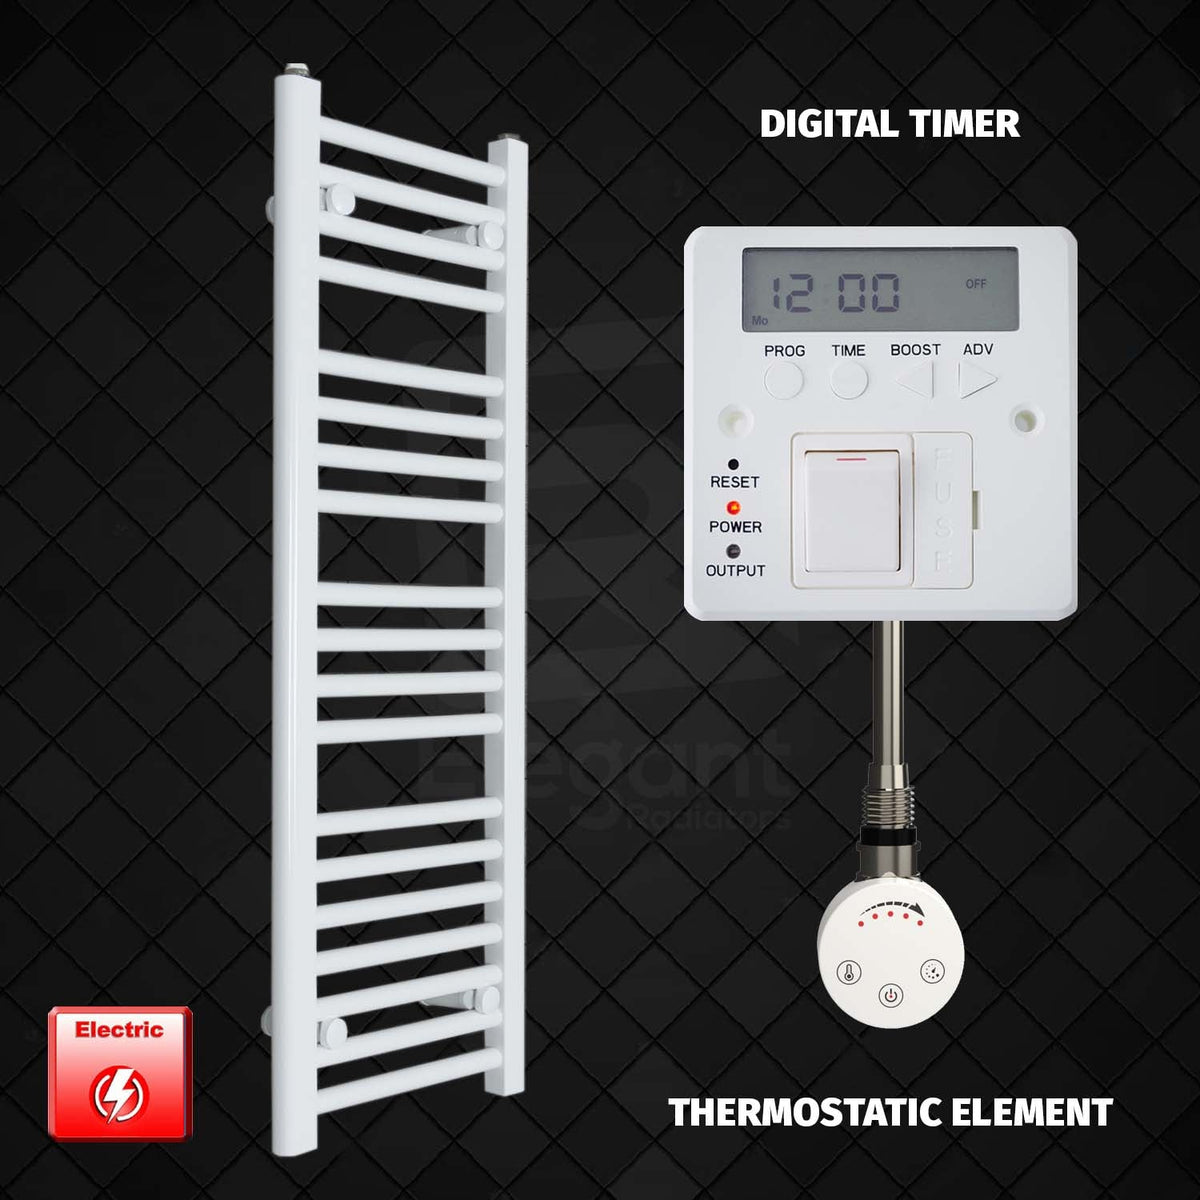 1000 mm High 300 mm Wide Pre-Filled Electric Heated Towel Rail Radiator White Smart Digital Timer Thermostatic Element